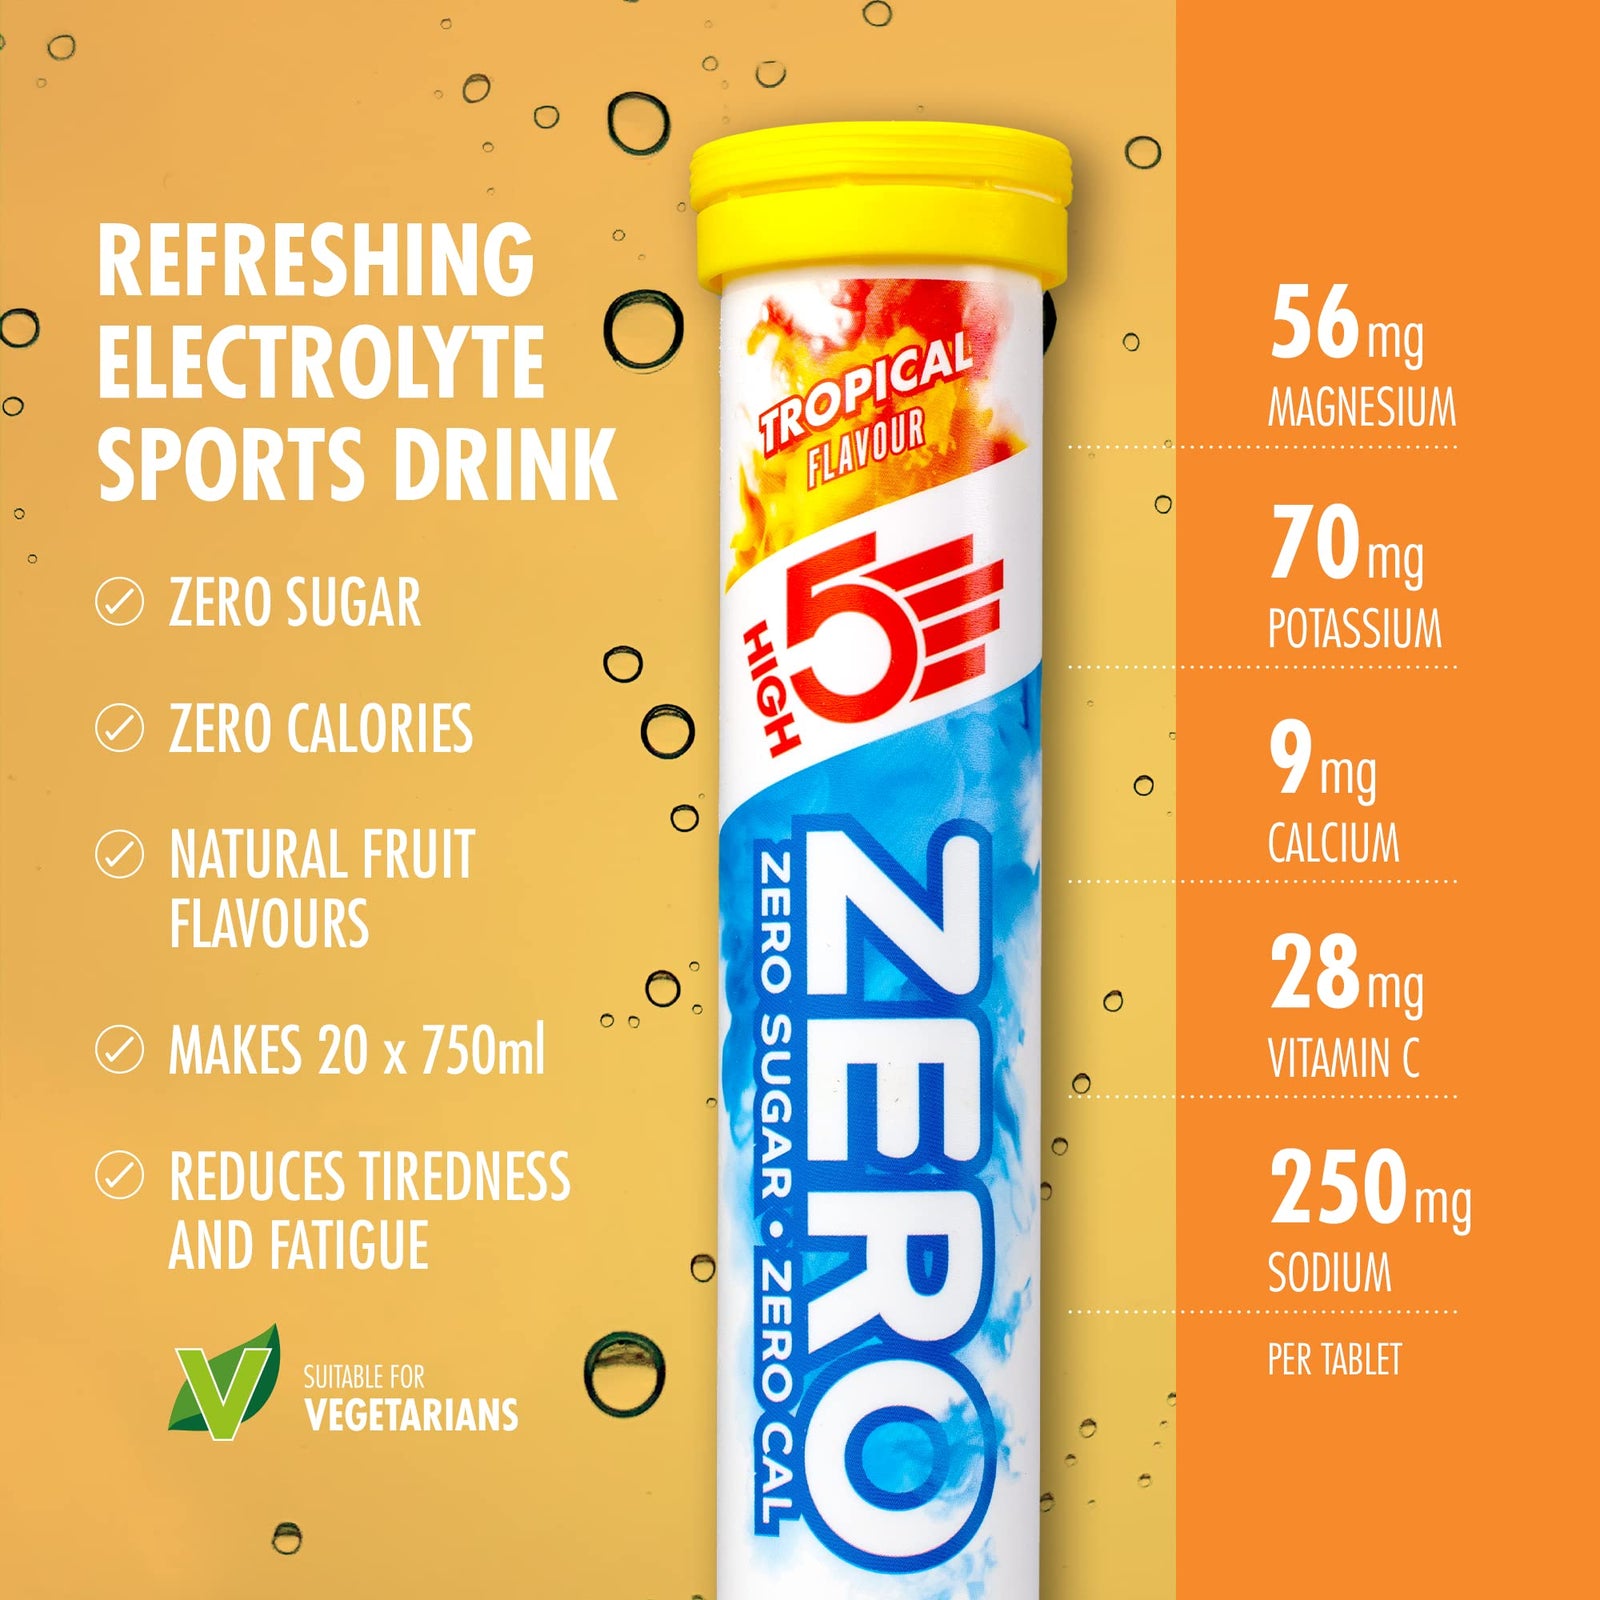 HIGH 5 ZERO SALTS TUBE Tropical Flavour Electrolyte Drink - 8 Pack Box